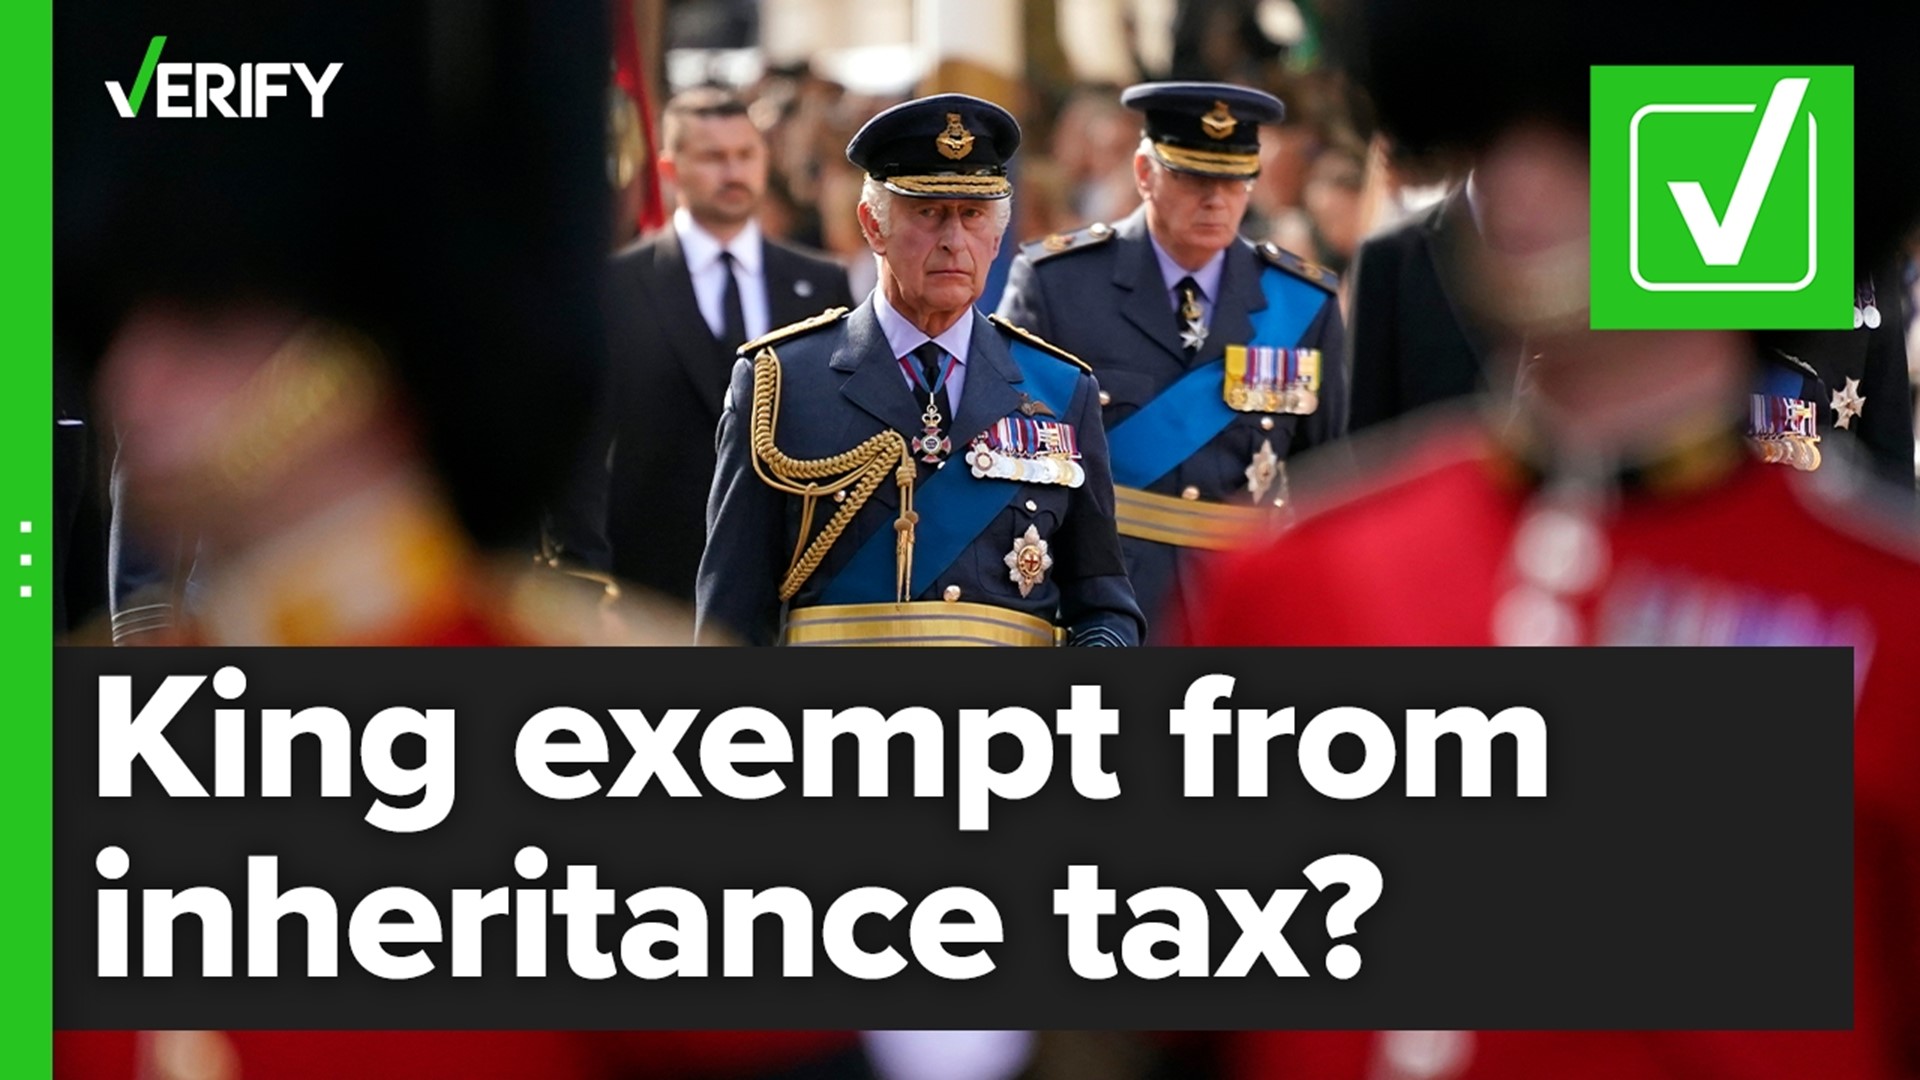 Queen Elizabeth II’s death at Balmoral Castle had people claiming King Charles III won’t have to pay inheritance tax like people in the U.K. do. That’s true.